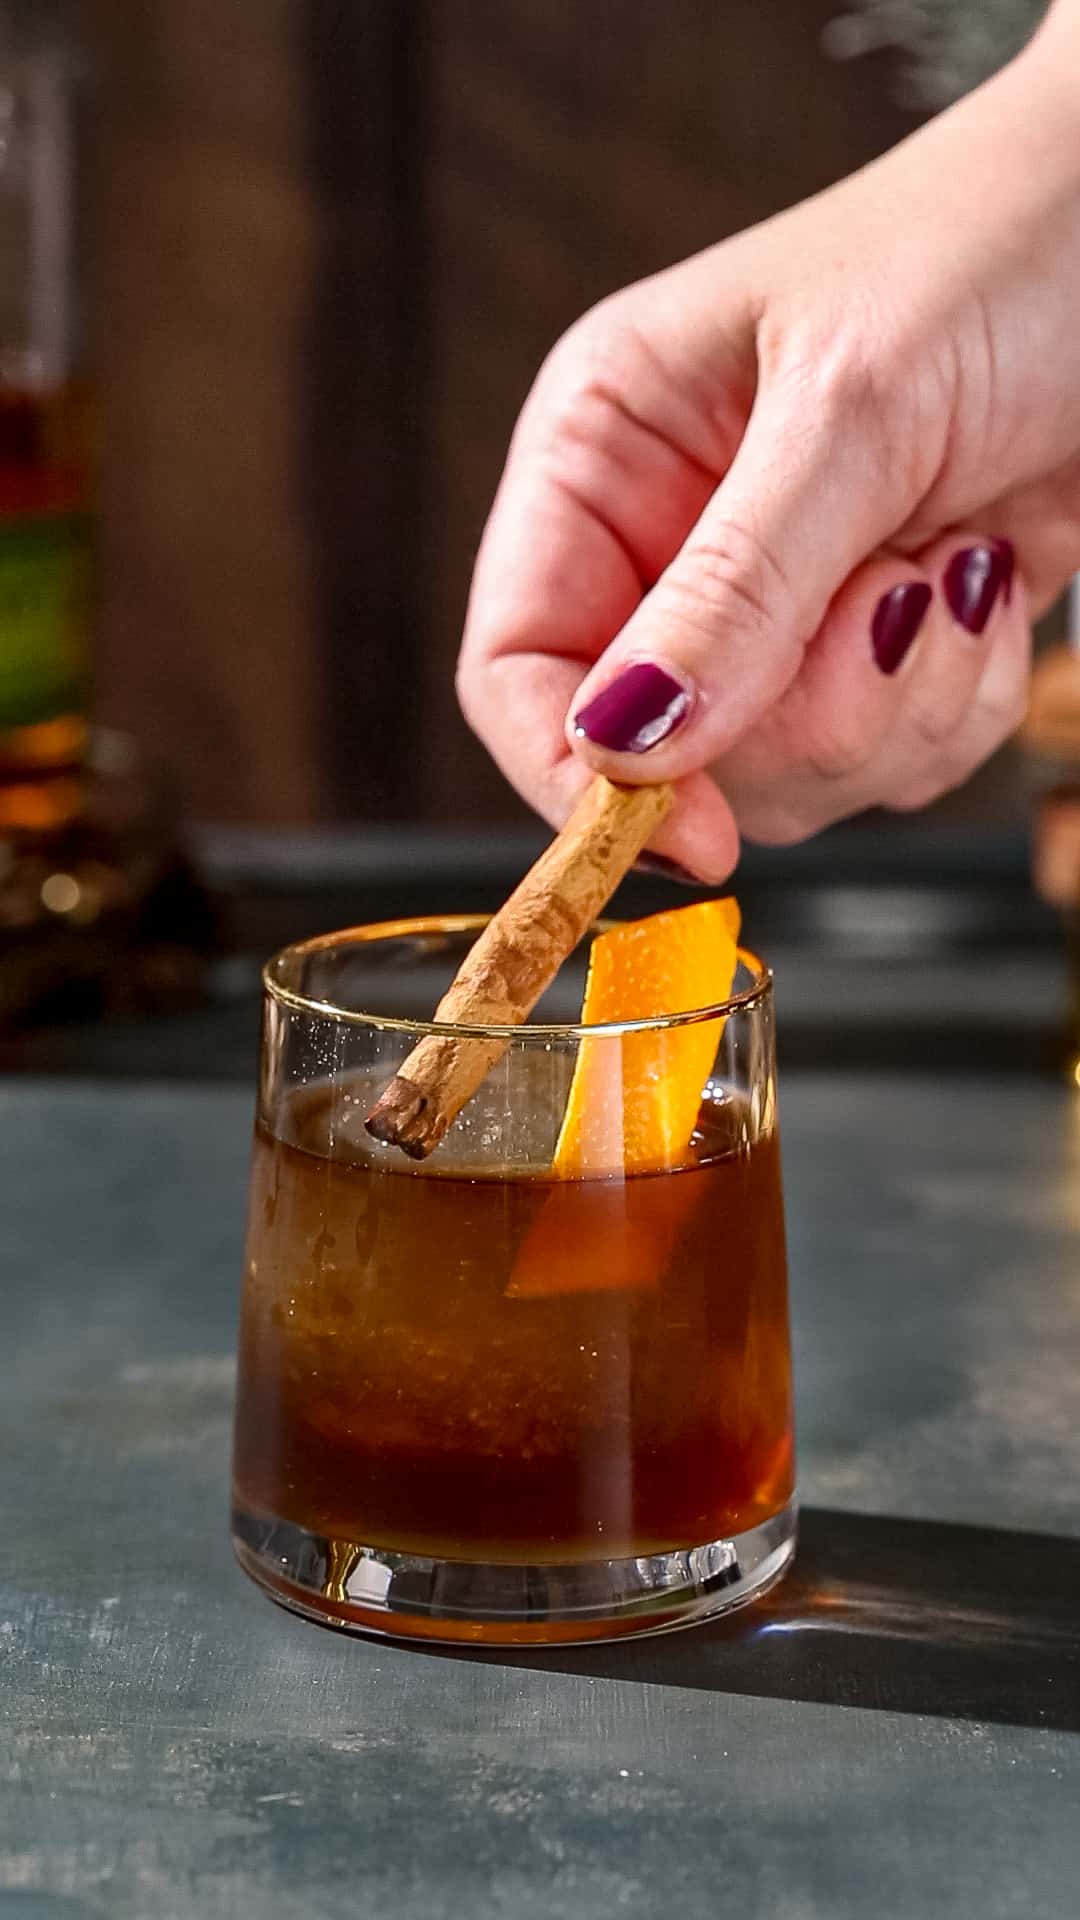 Hand adding a whole cinnamon stick to a brown cocktail that also has a large ice sphere and a parallelogram shaped orange peel in it.